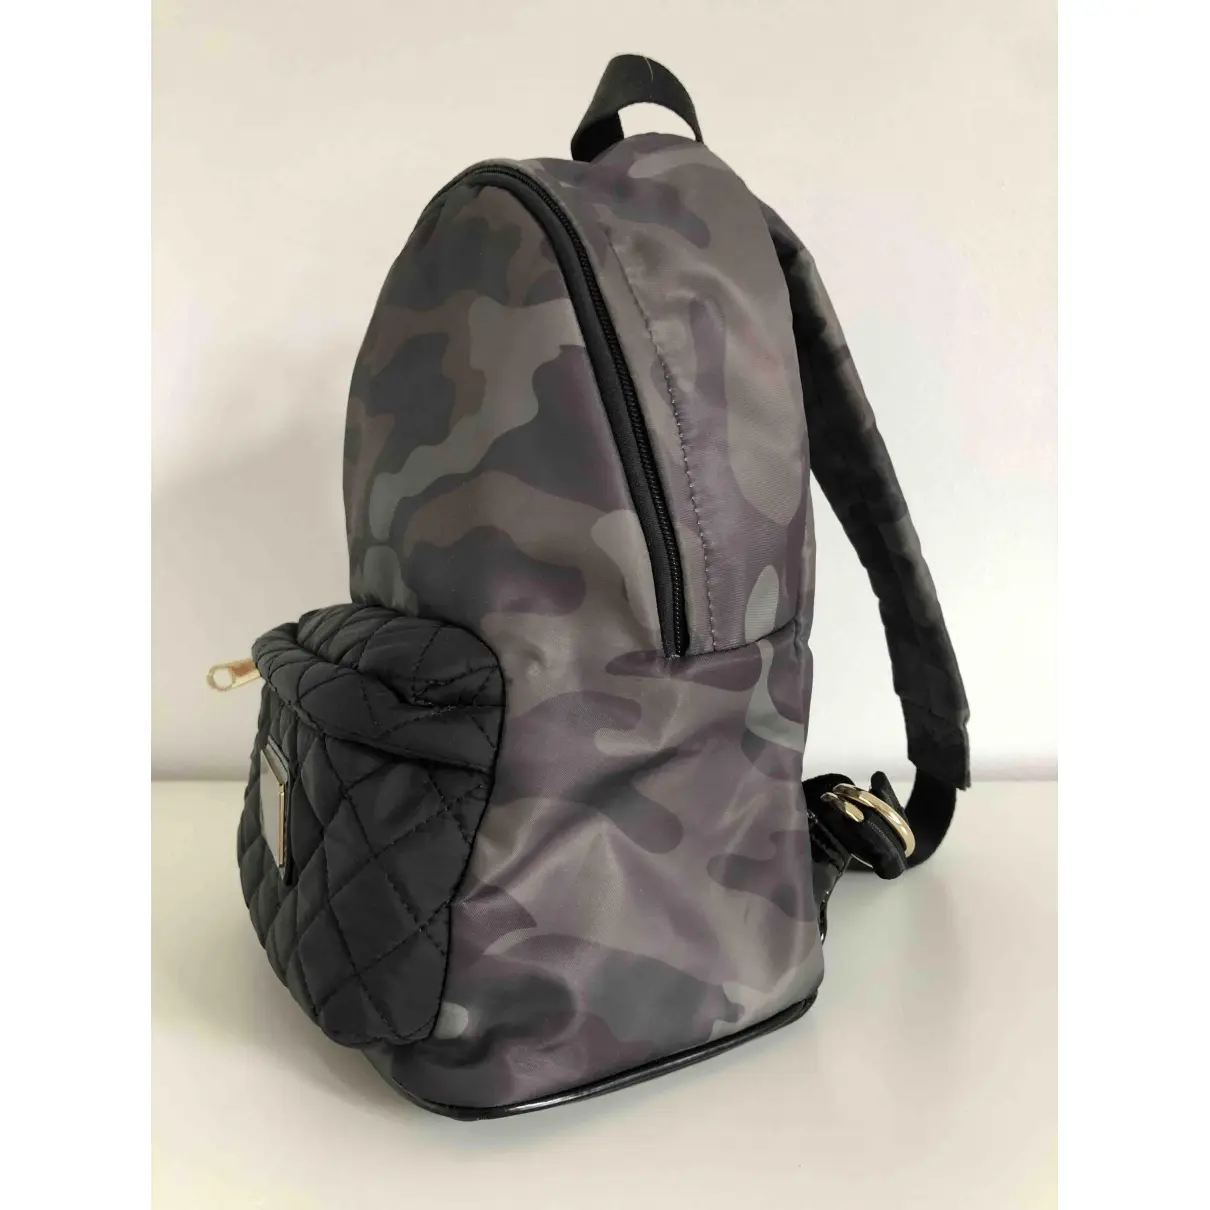 Buy GUESS Backpack online